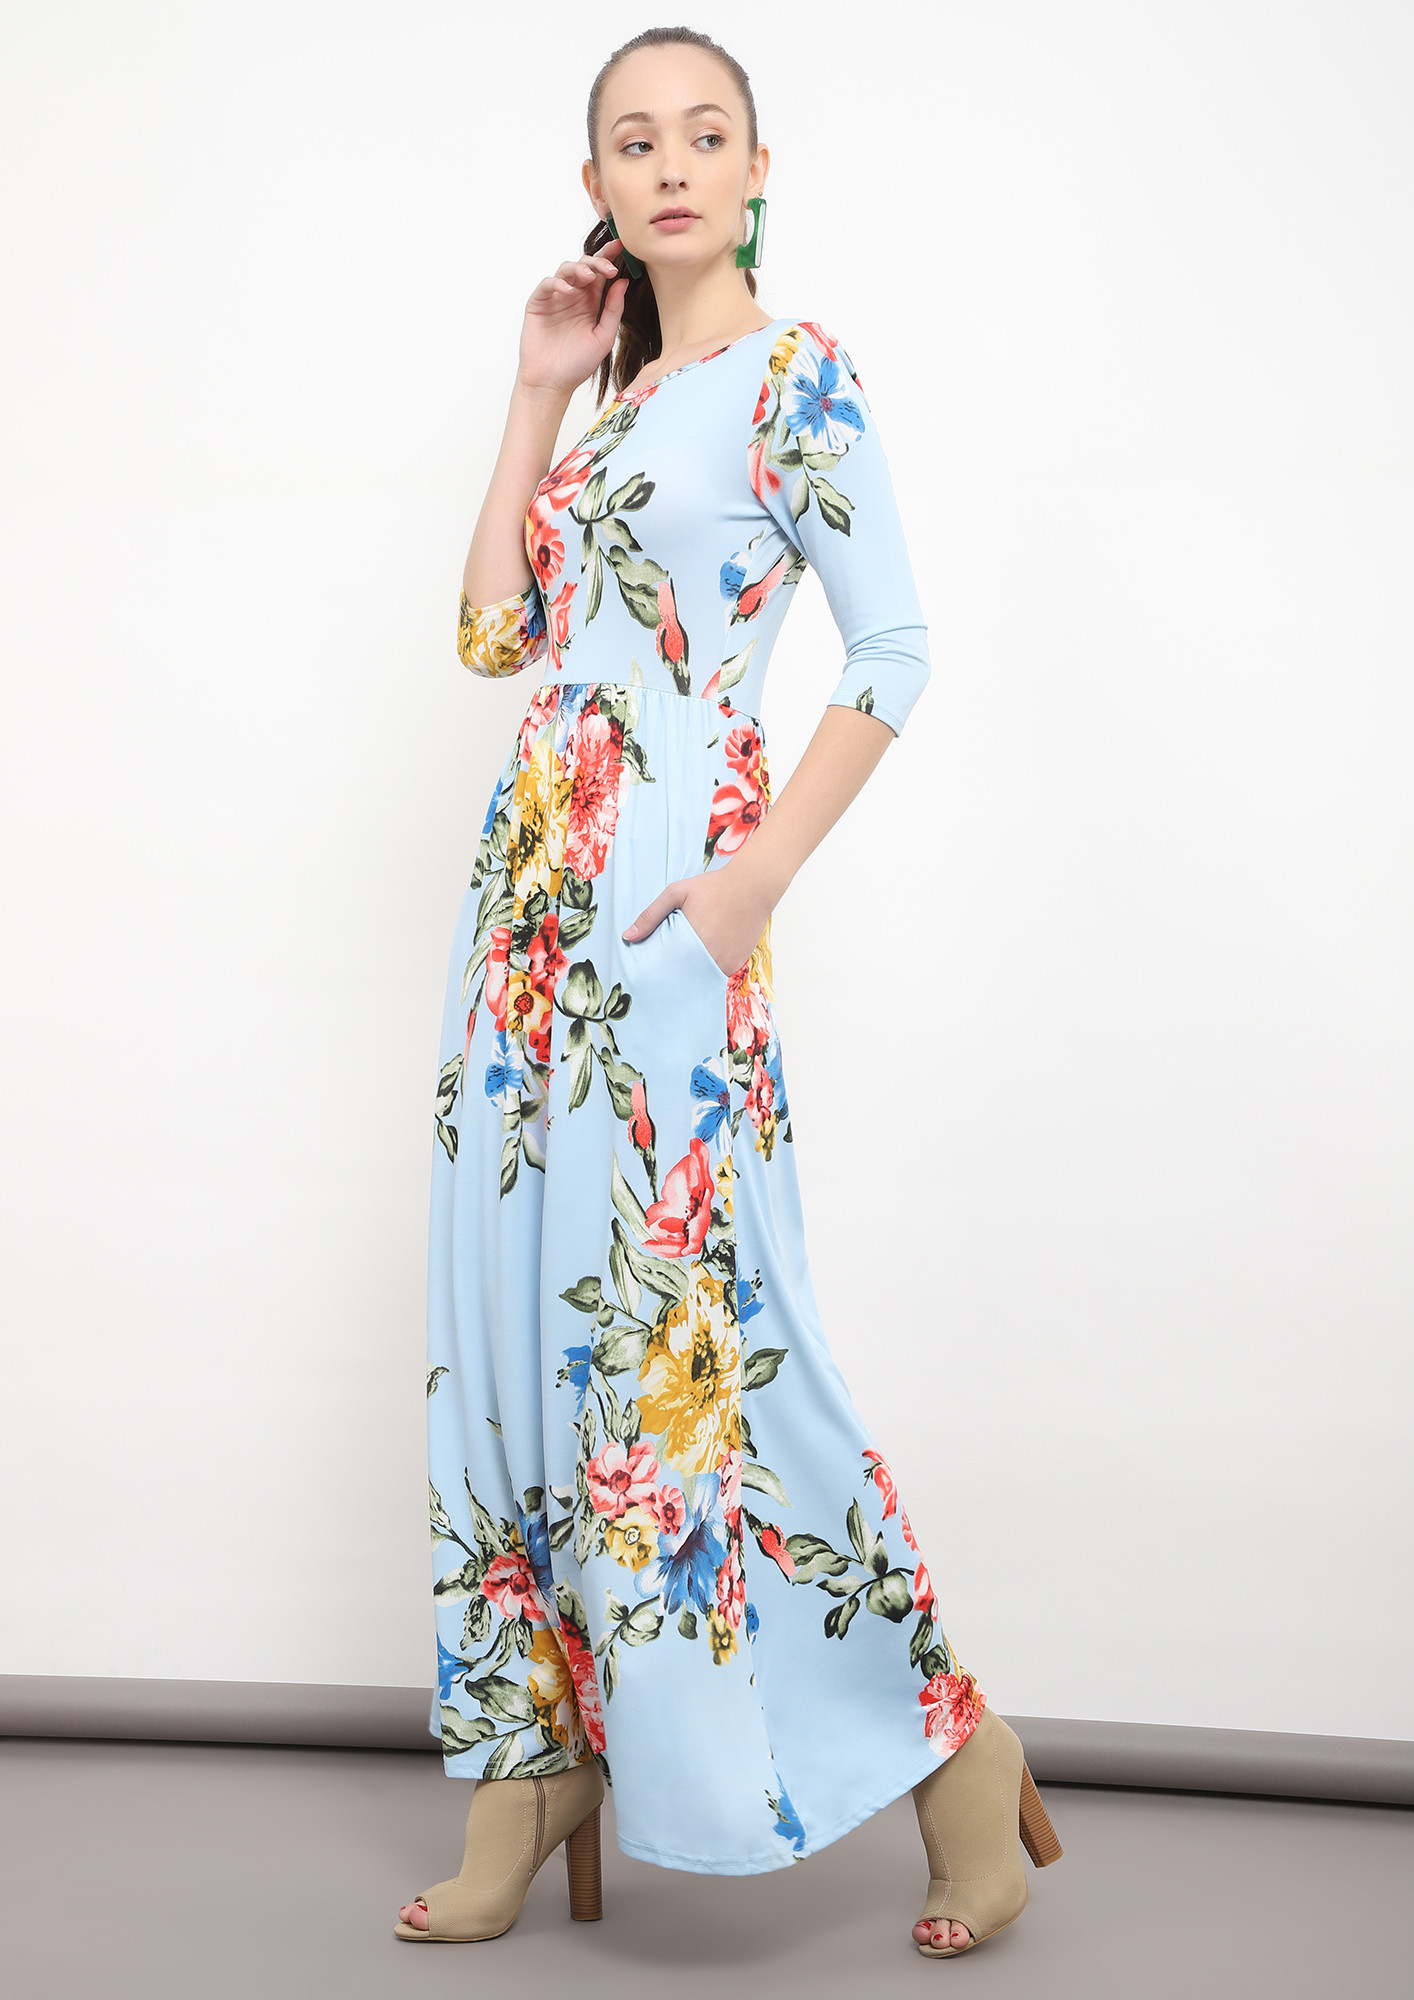 FLO-REAL THIS TIME BLUE MAXI DRESS 